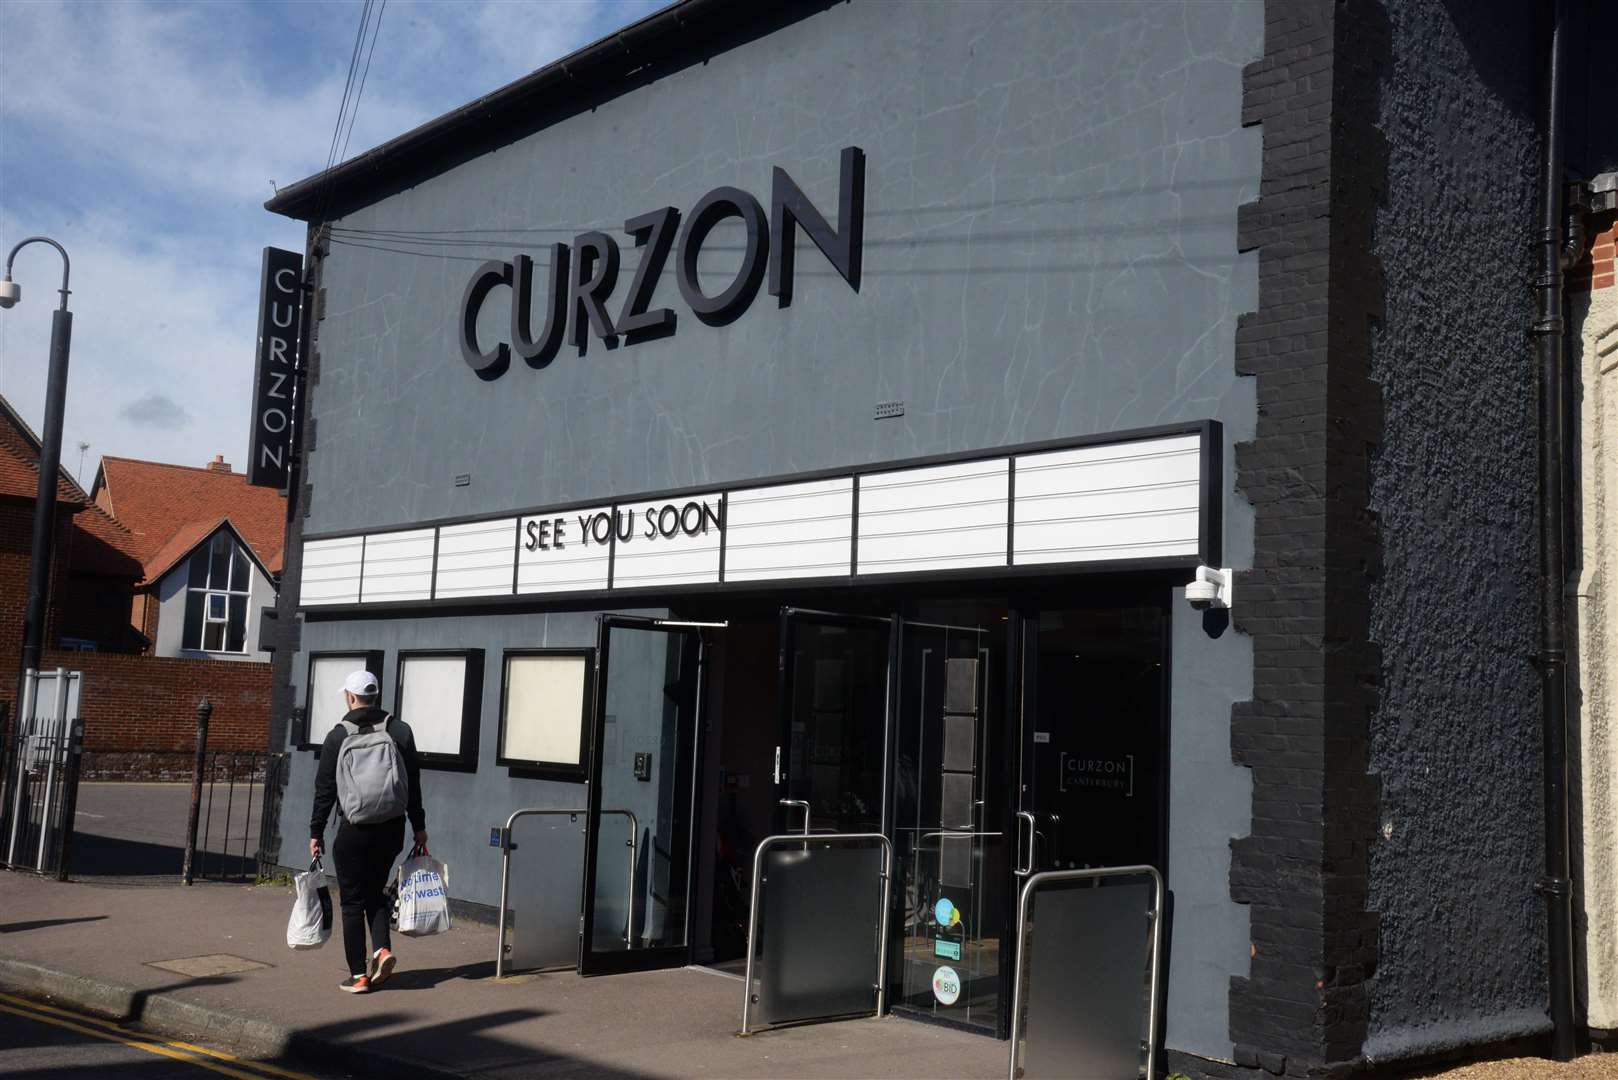 Canterbury's Curzon is open